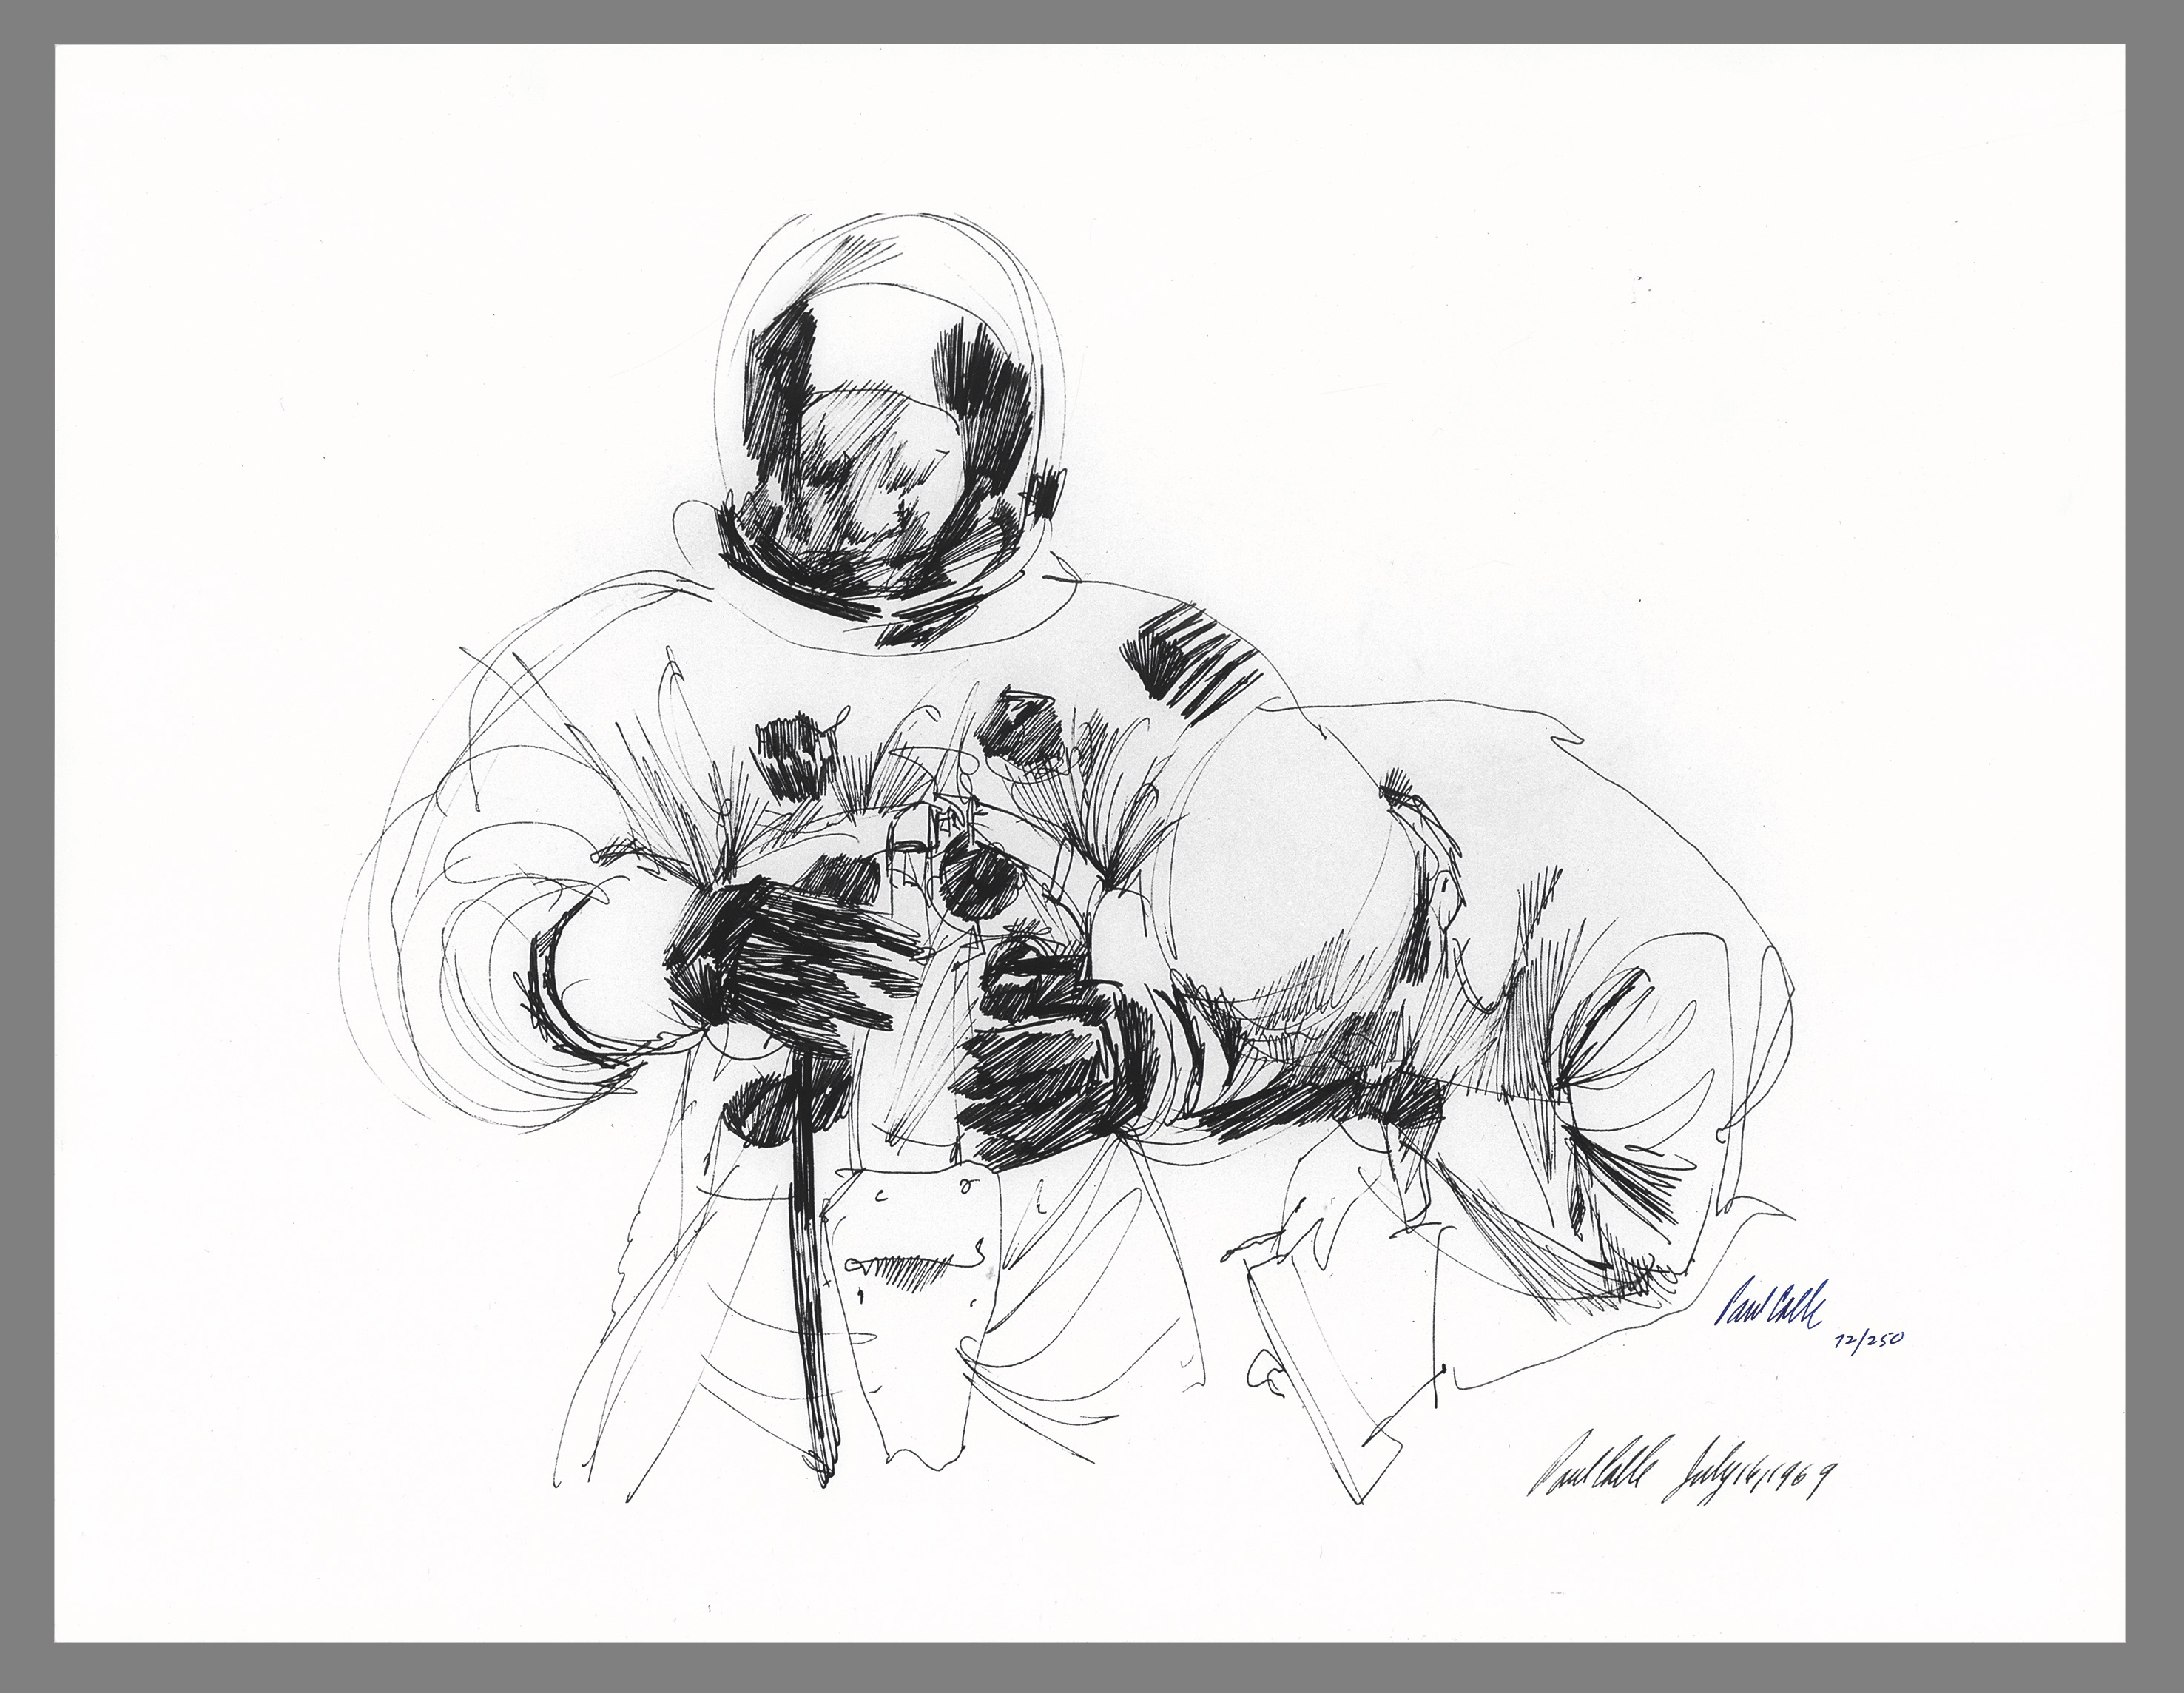 Lot #437 Paul Calle Signed Limited Edition Print - 'Buzz Aldrin' - Image 1